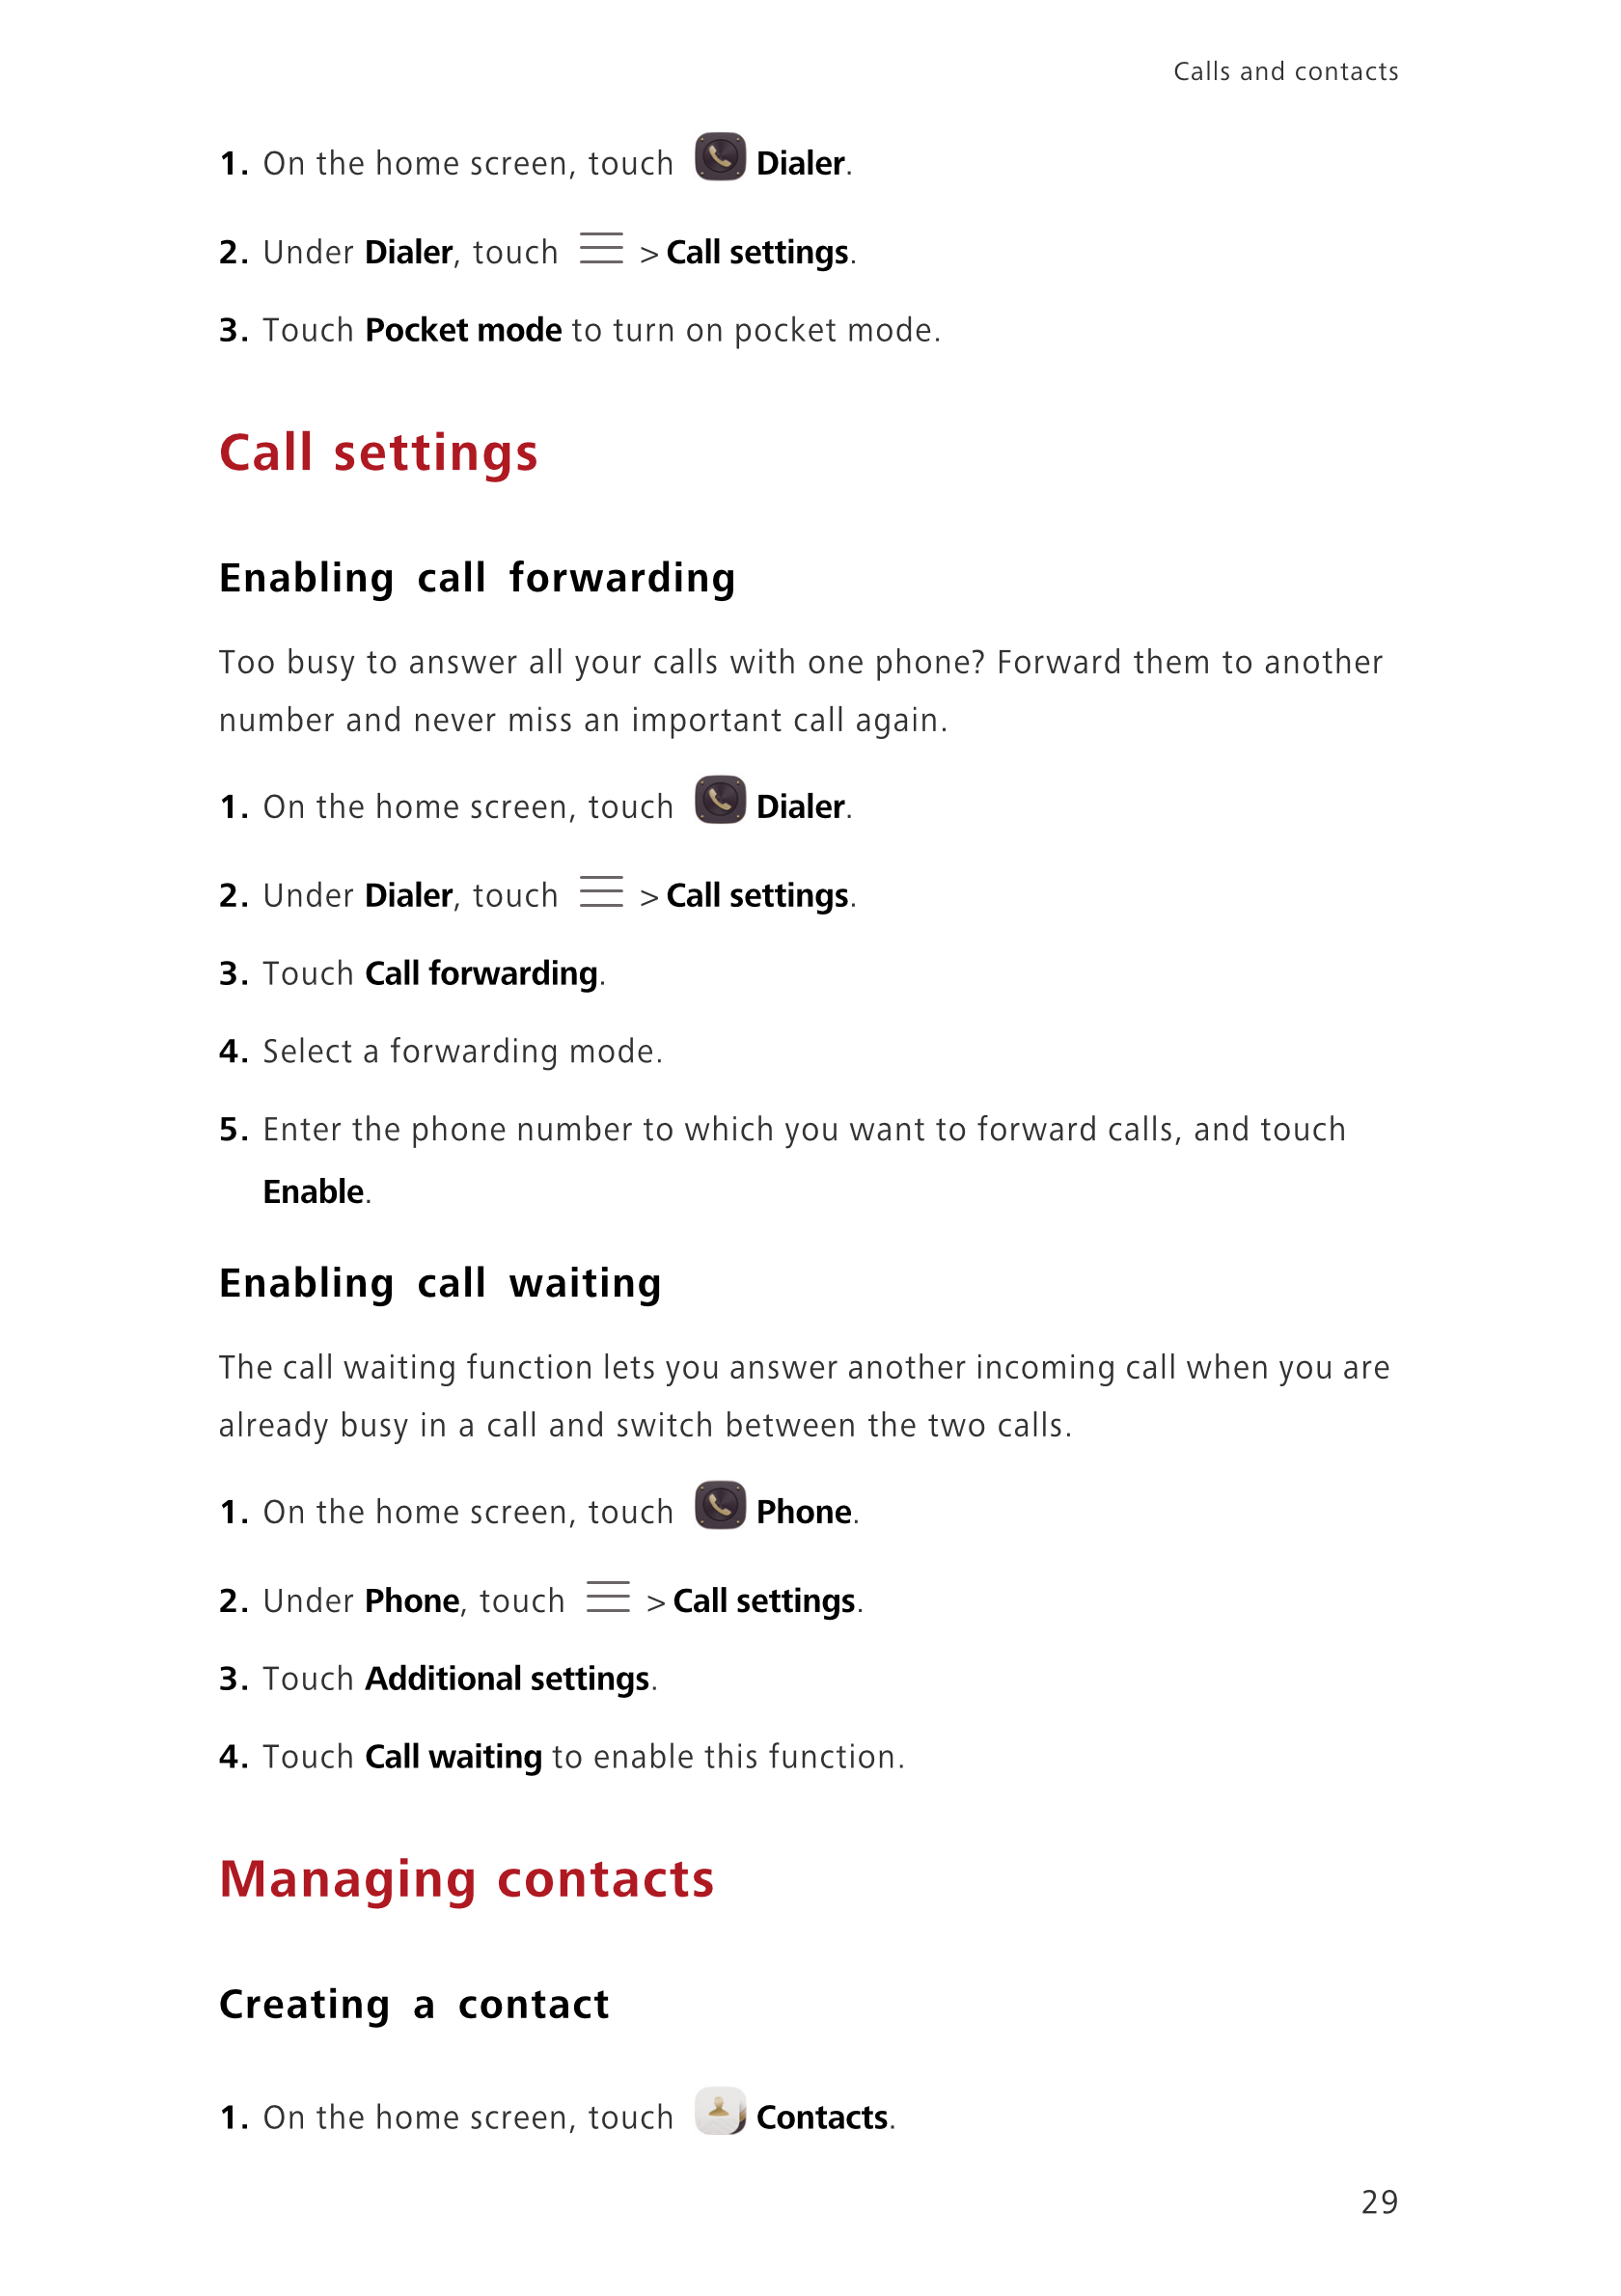 Calls and contacts  
1.  On the home screen, touch  Dialer.
2.  Under  Dialer, touch   >  Call settings. 
3.  Touch  Pocket mode